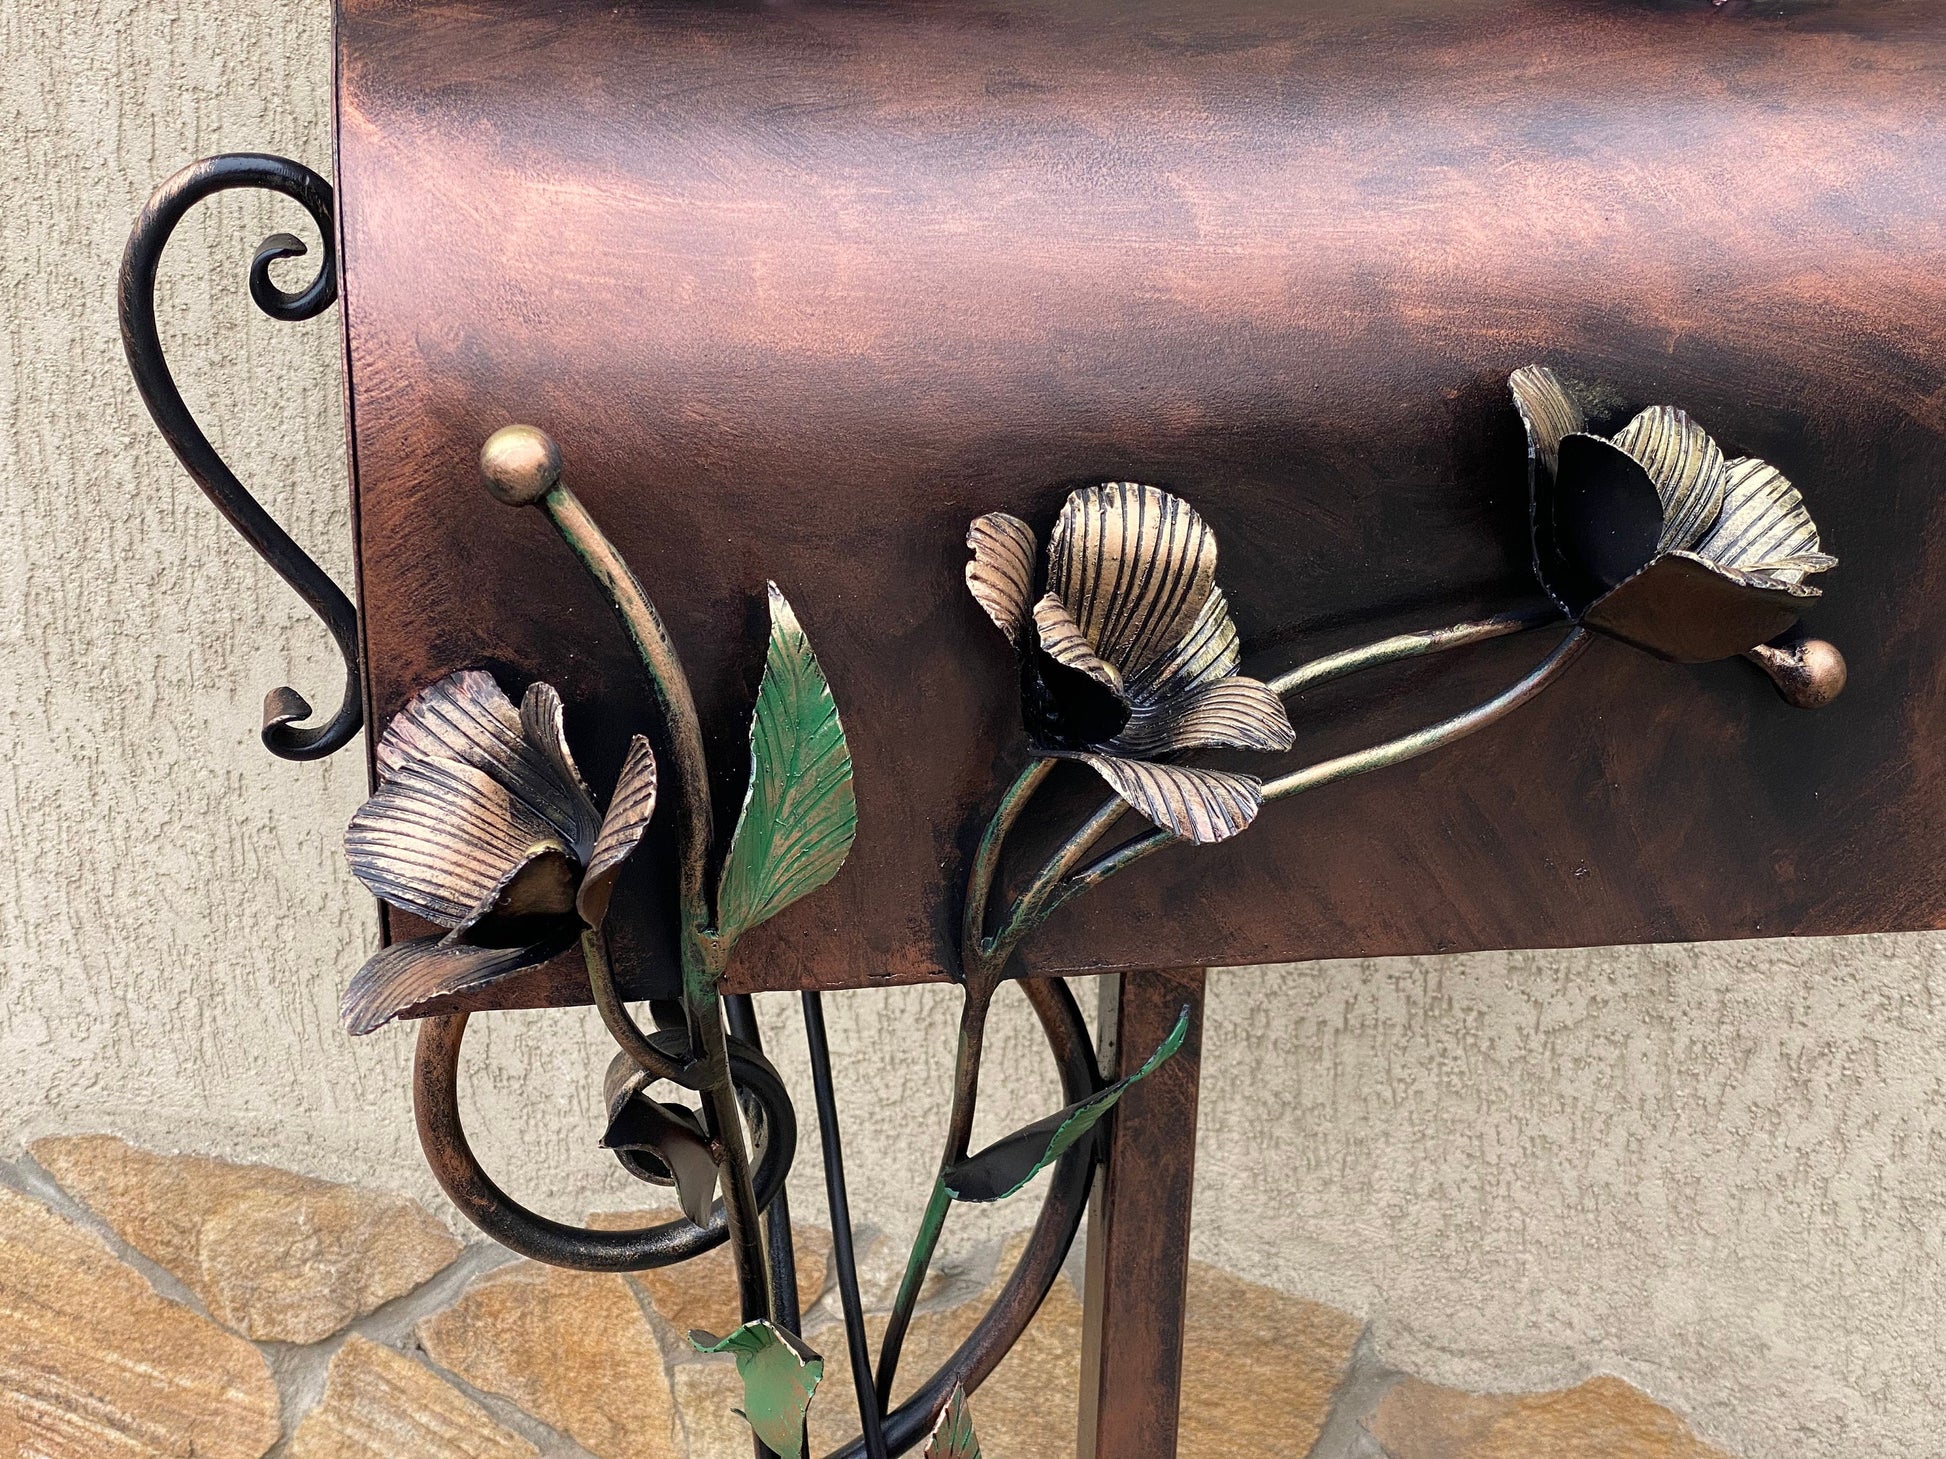 Mailbox, bird decor, mail box, hand forged rose, nest, gift for wife, orchid, Christmas, 11th anniversary, gift for couple, anniversary gift